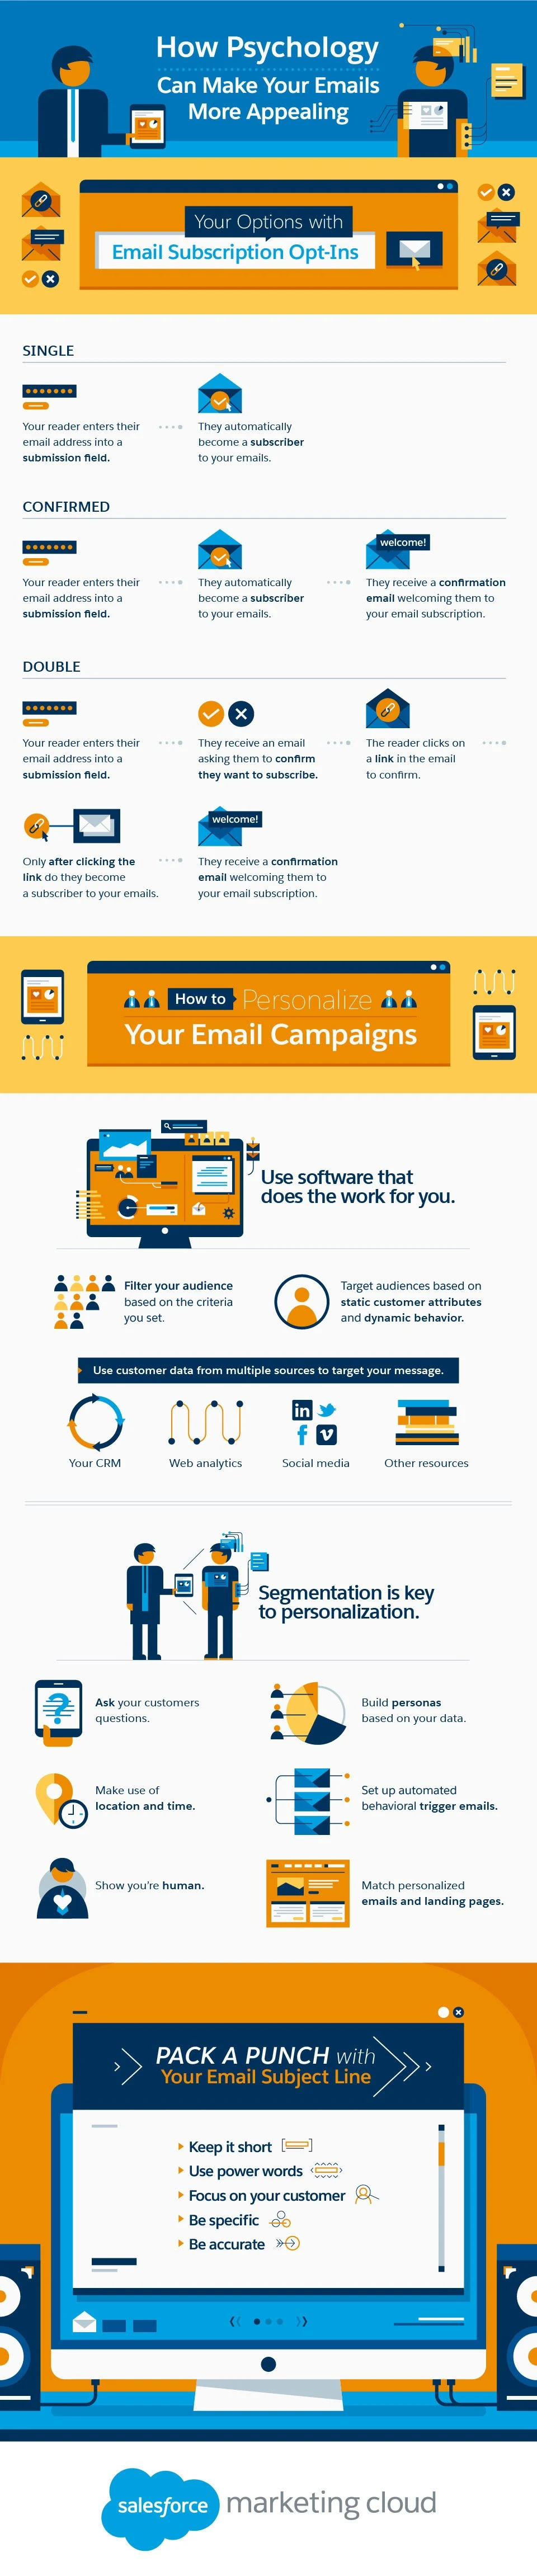 How Psychology Can Make Your Emails More Appealing - #infographic